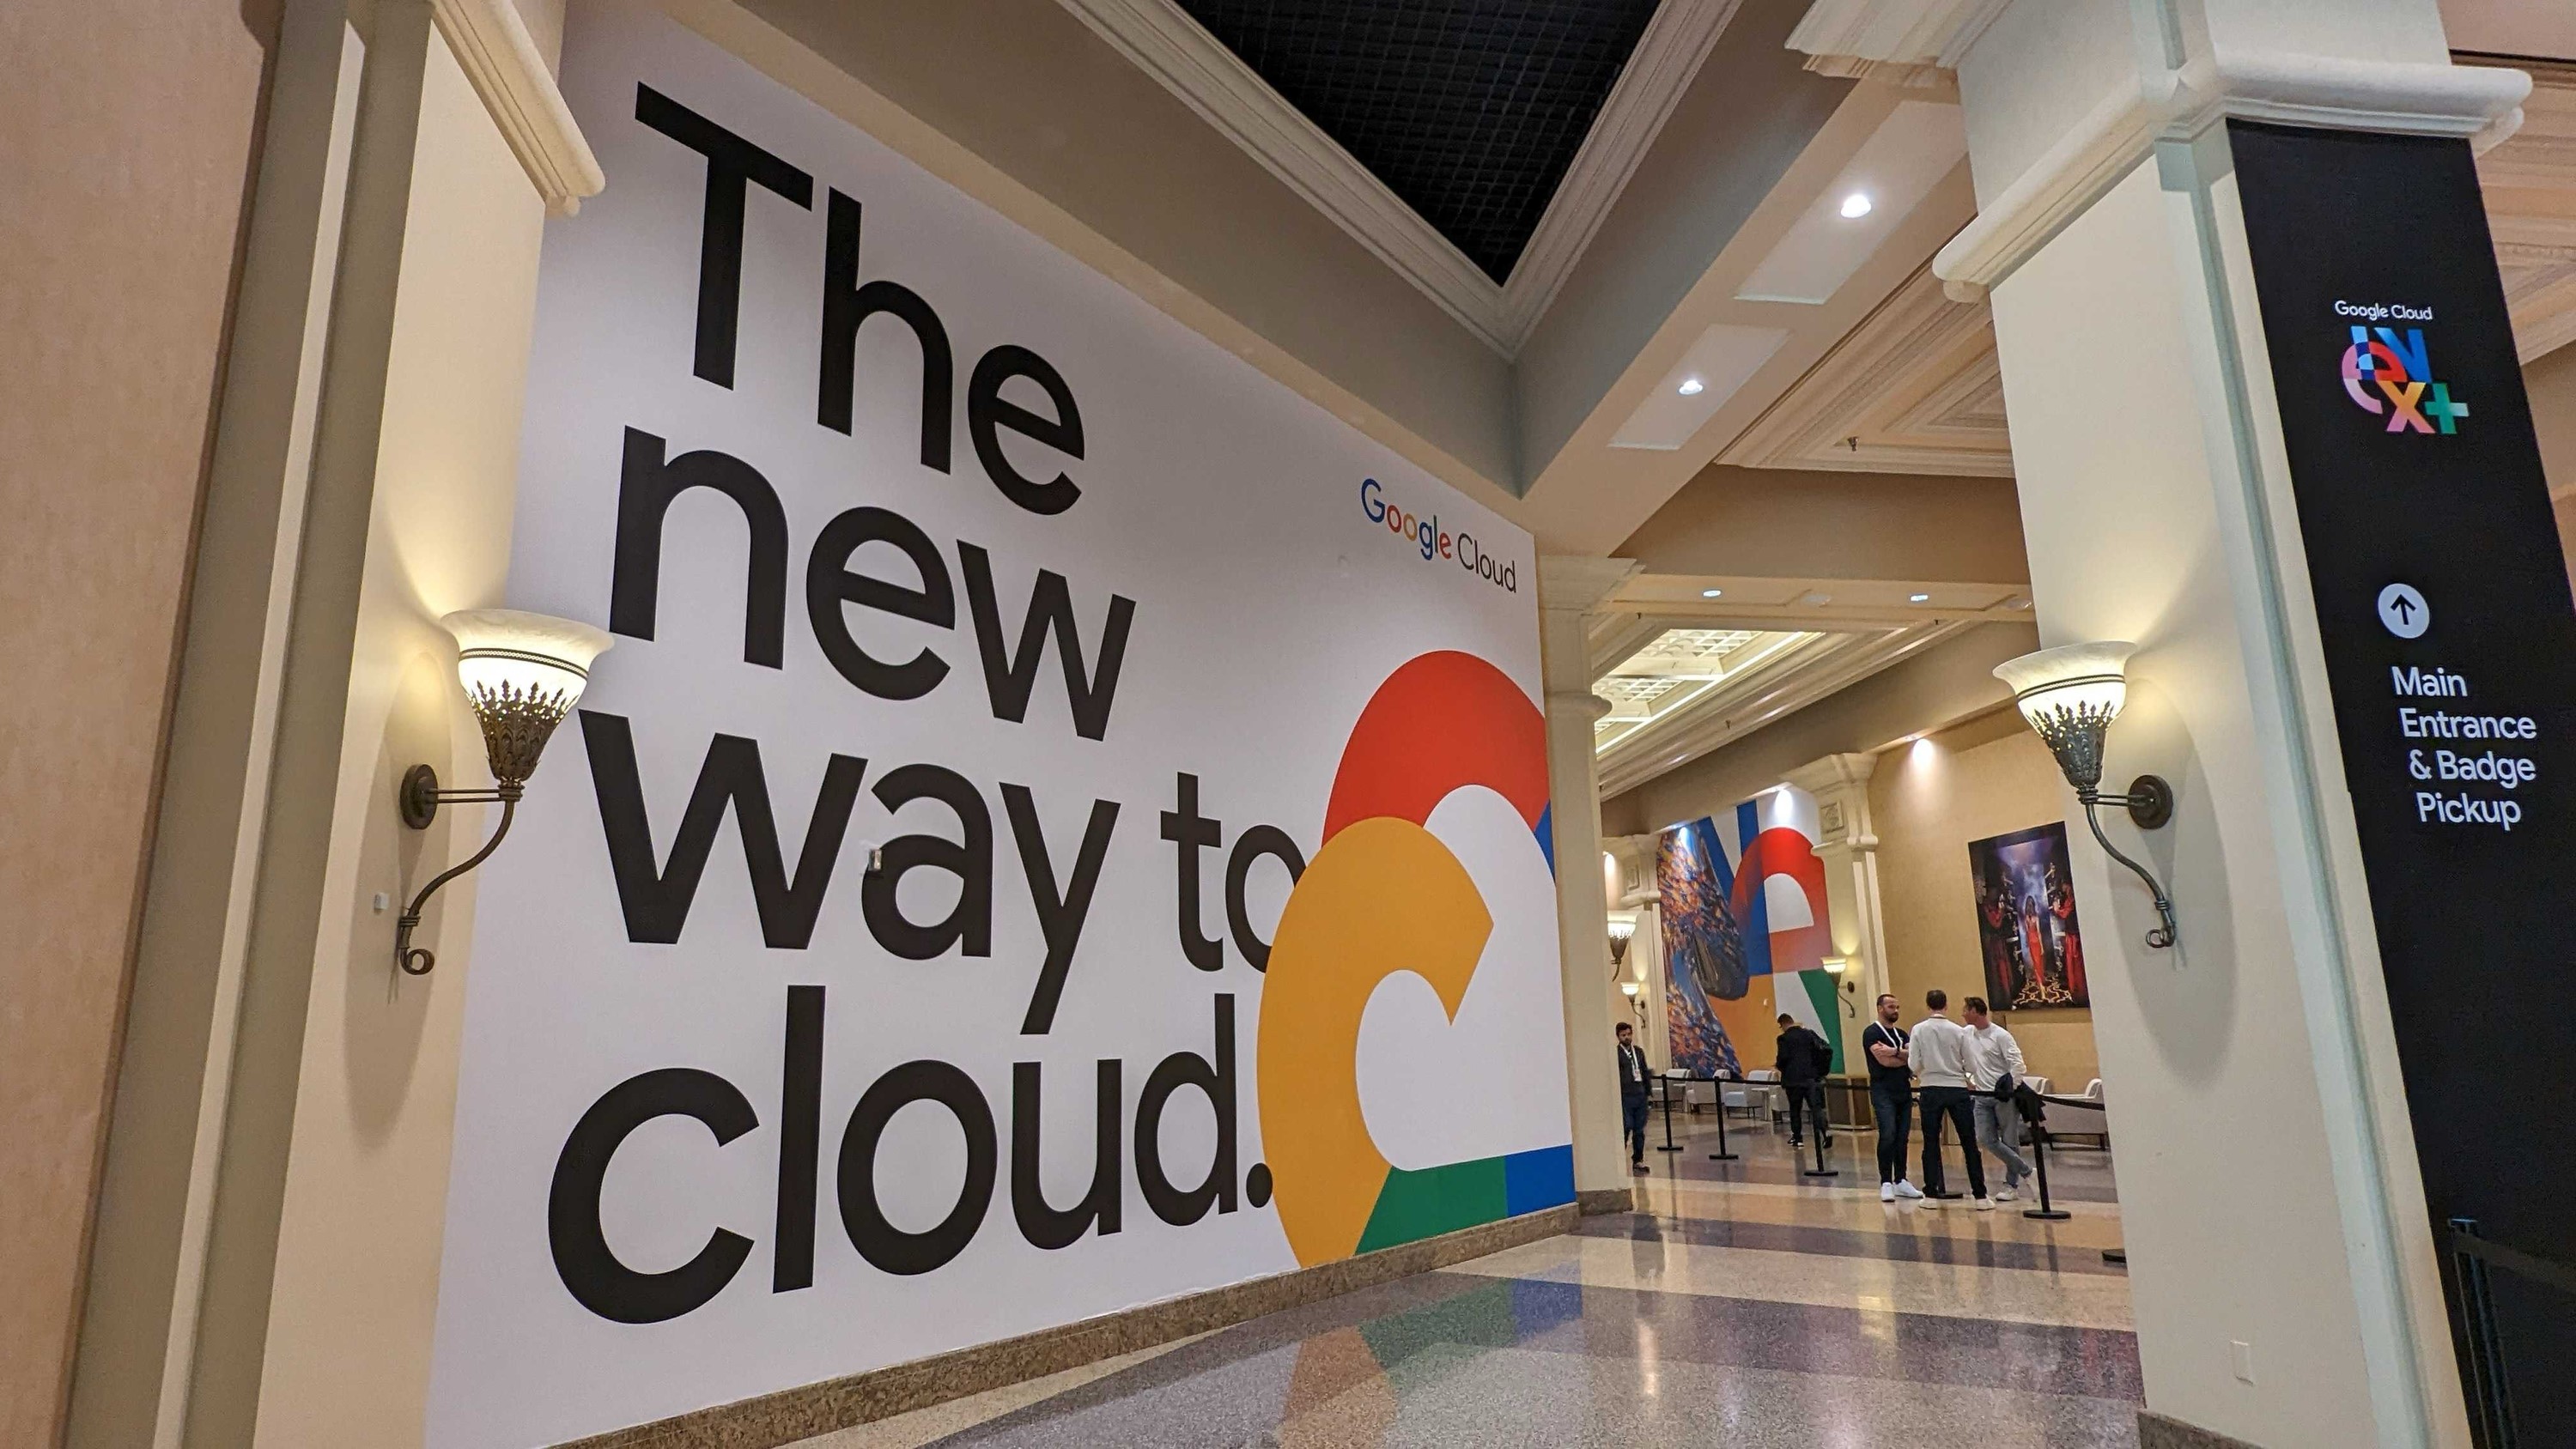 Promotional advertising banner pictured at Google Cloud Next 2024 at the Mandalay Bay hotel in Las Vegas, Nevada, on April 8th 2024.